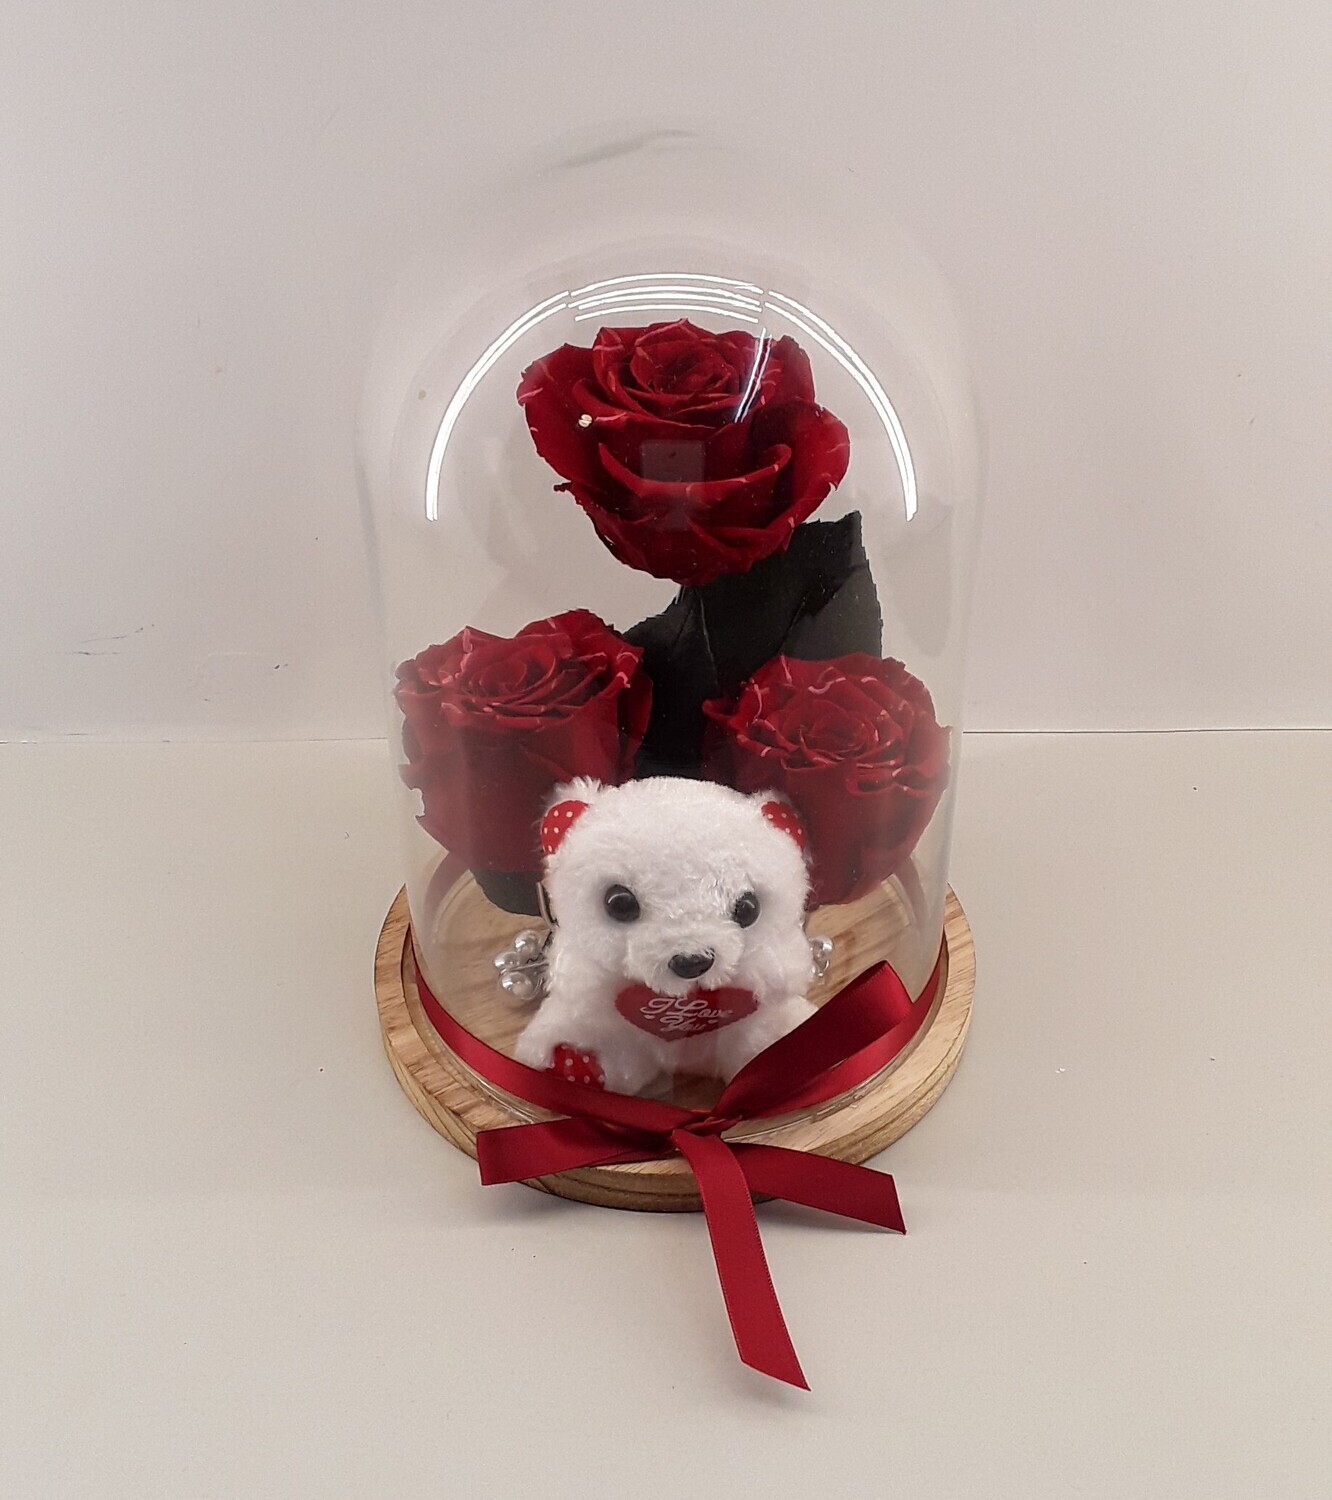 F35--Red forever roses with small teddy bear in glass!!!